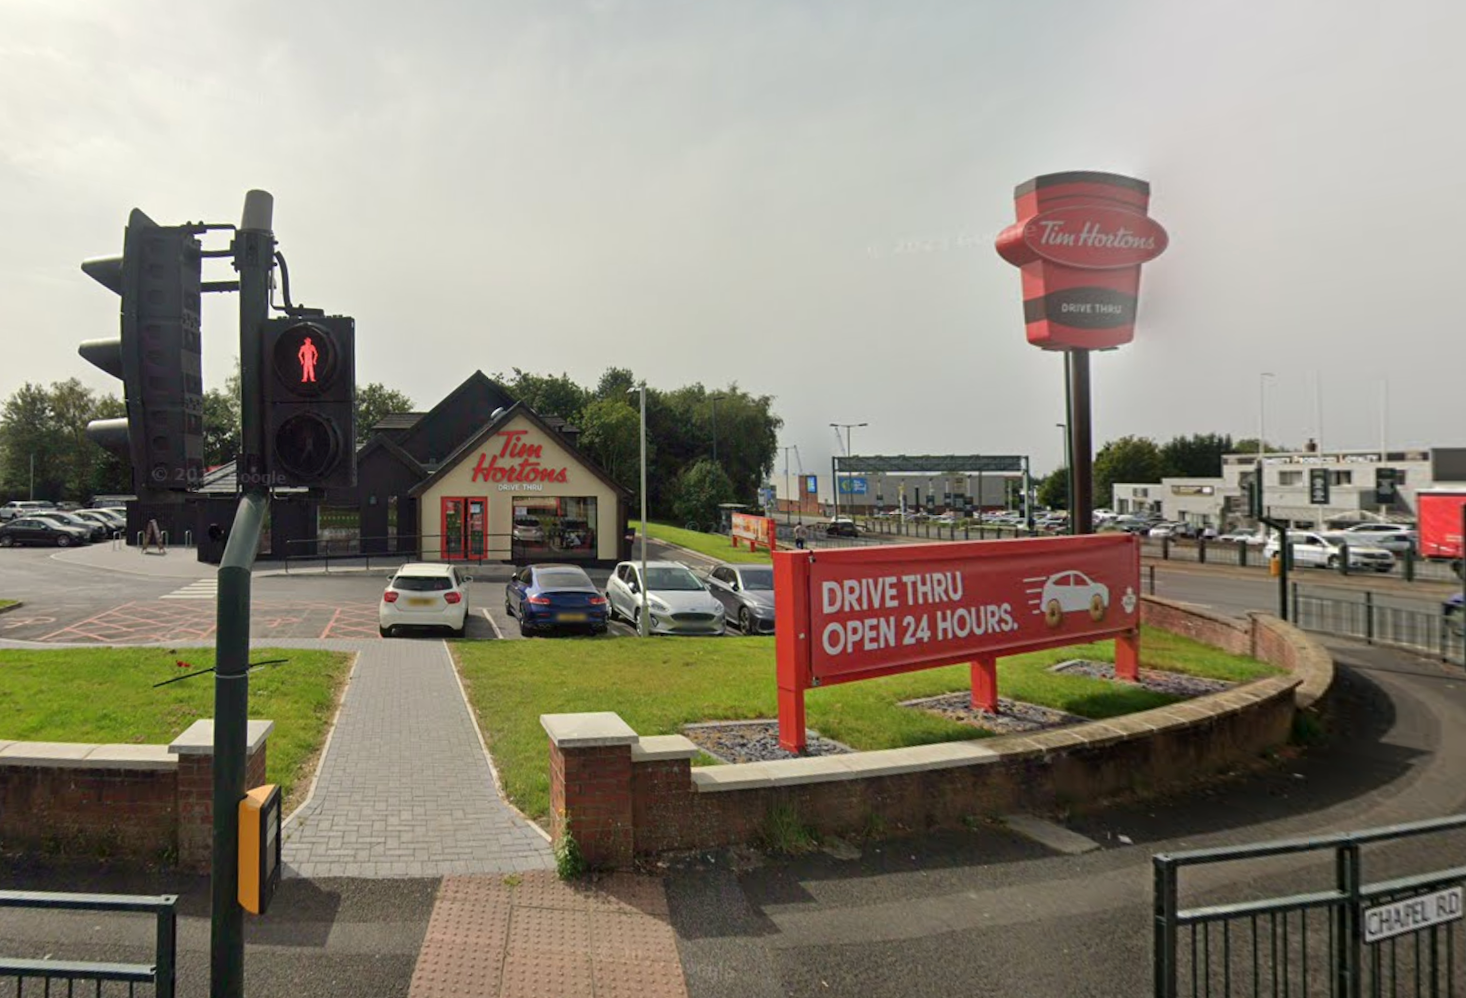 The fast food drive-thru remained closed while a police cordon was in place